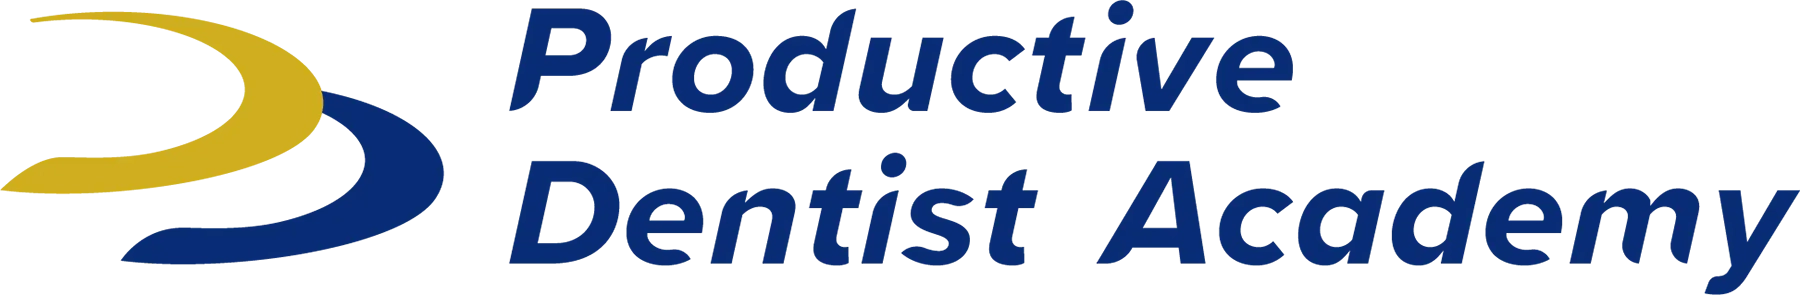 Productive Dentist Academy Unveils Investment Grade Practice Seller Readiness Program  | Image Credit: © Productive Dentist Academy